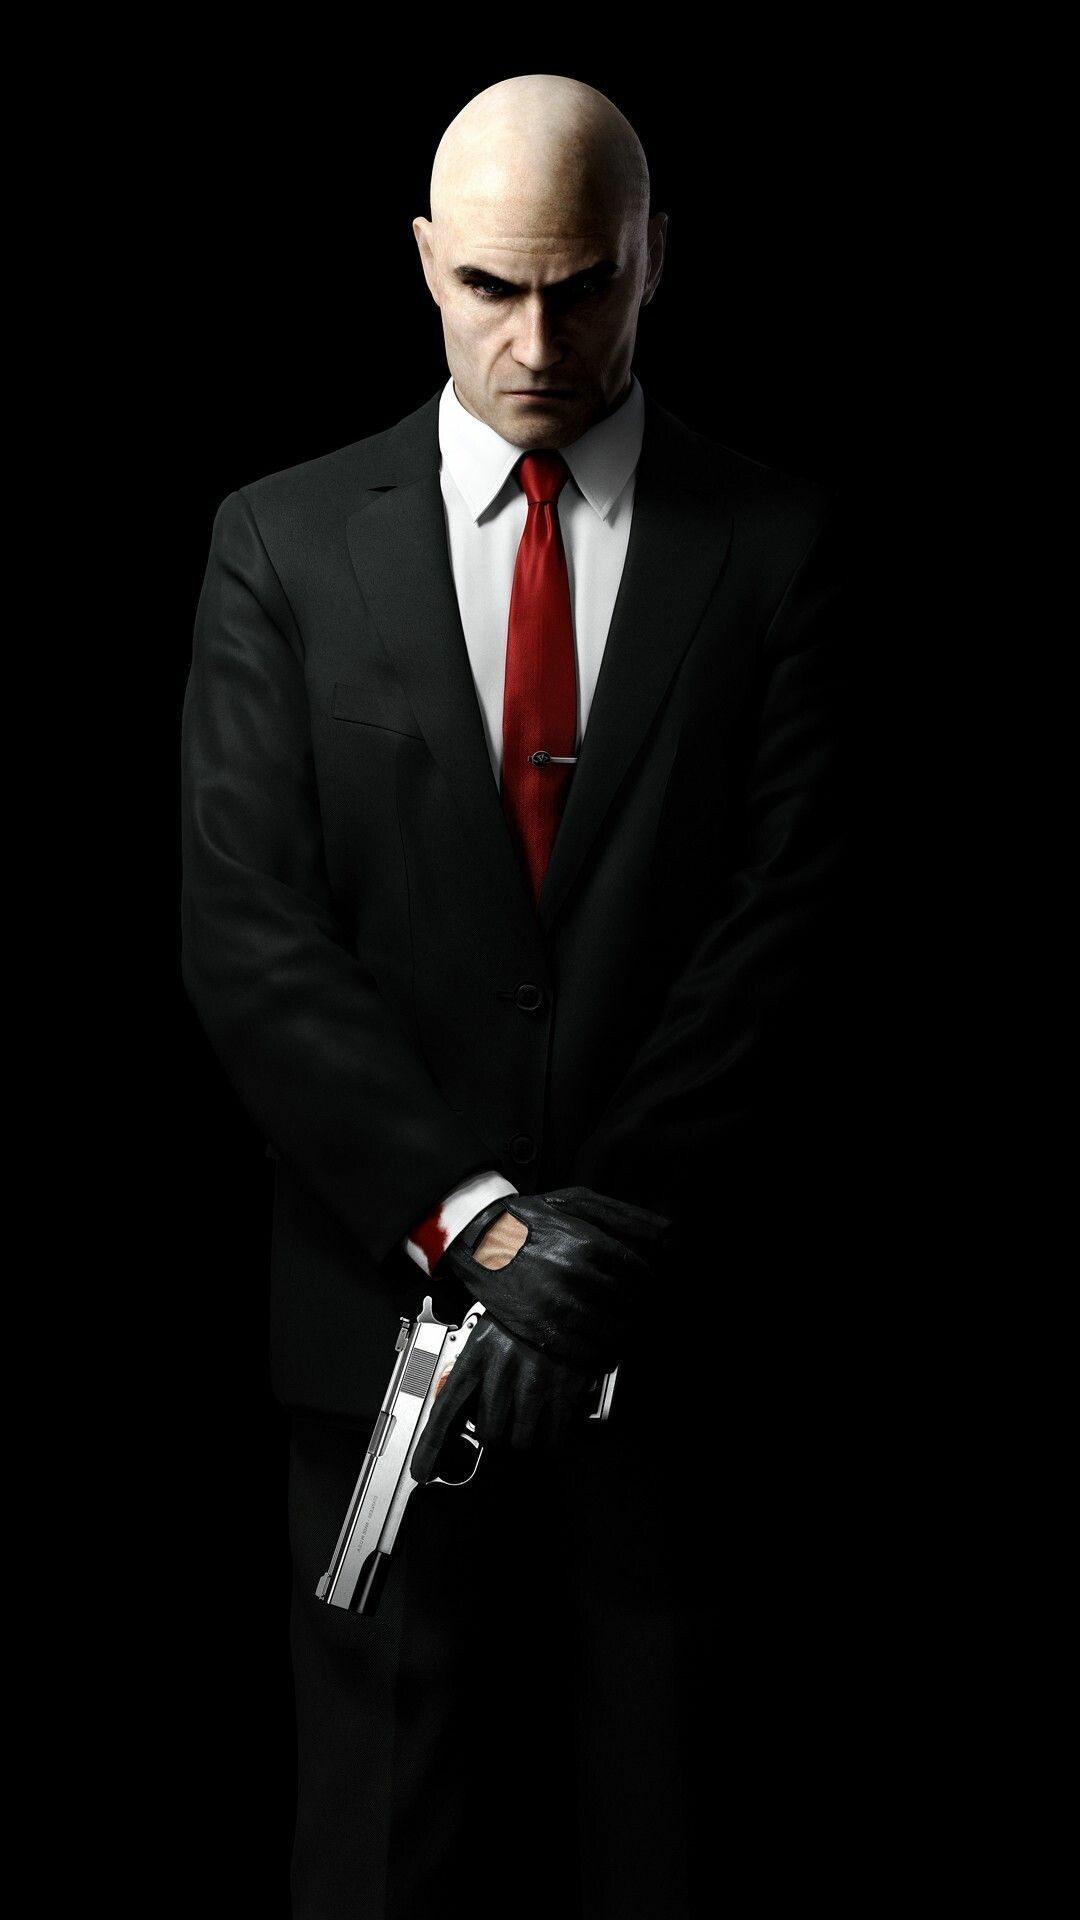 Hitman (Game): The player controls 47 as he travels around the world to execute hits on various criminals. 1080x1920 Full HD Background.